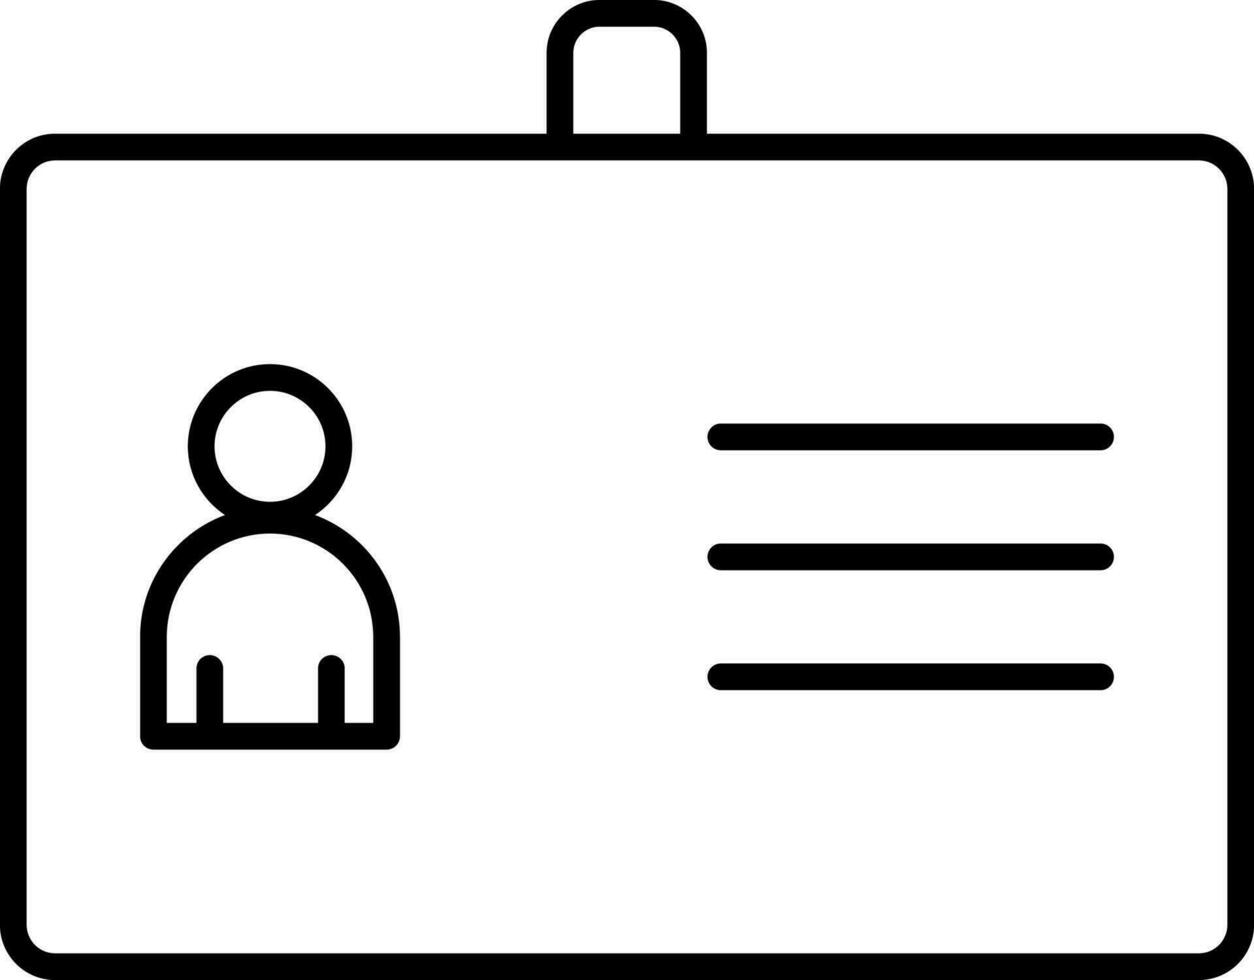 Blank ID Card Icon In Black Outline. vector